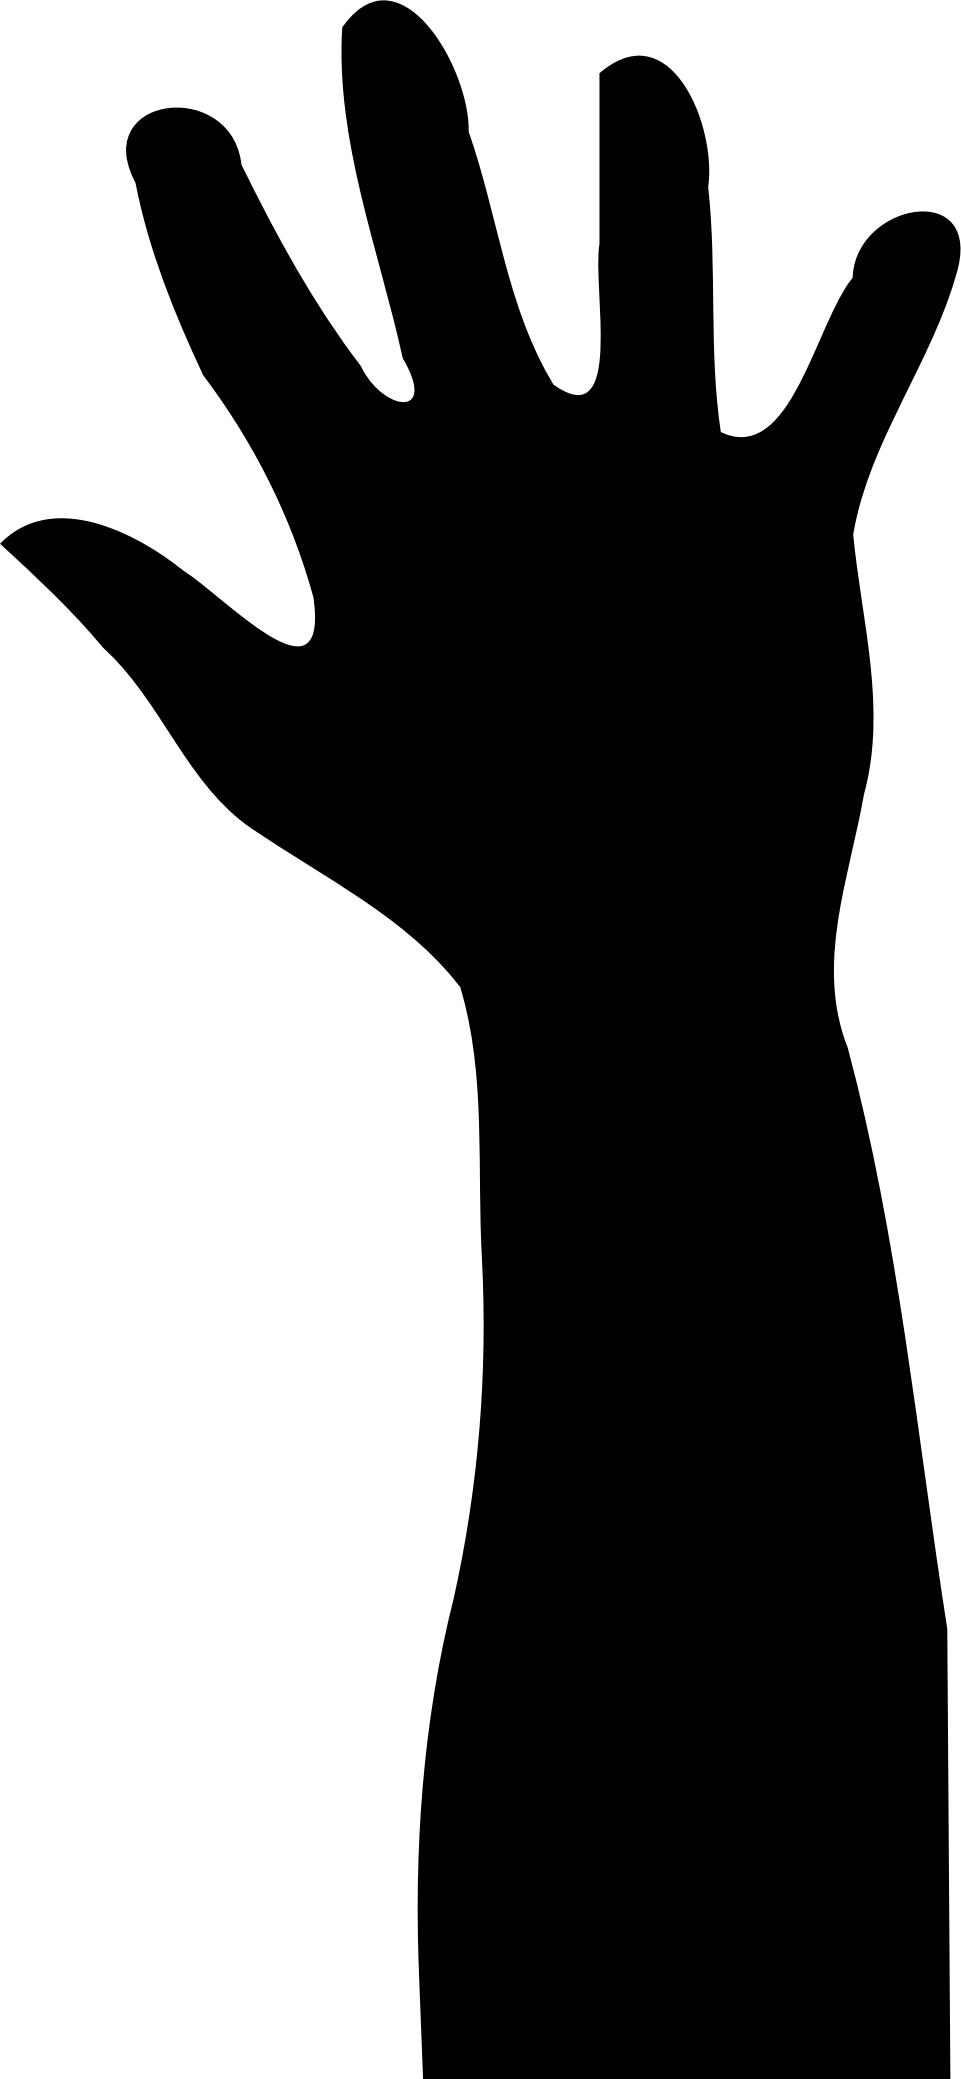 Raised Hand in Silhouette PNG icons